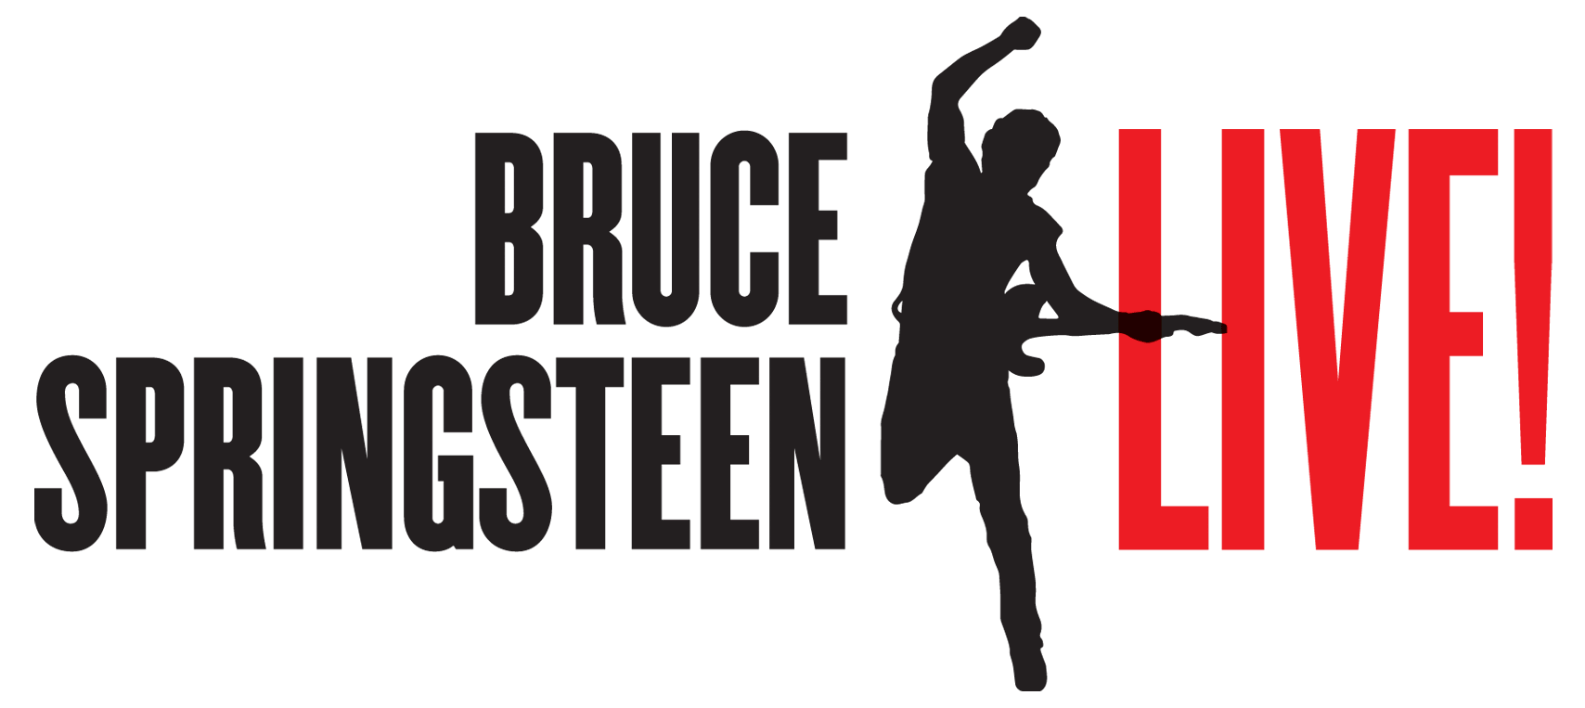 Bruce Spingsteen Live!